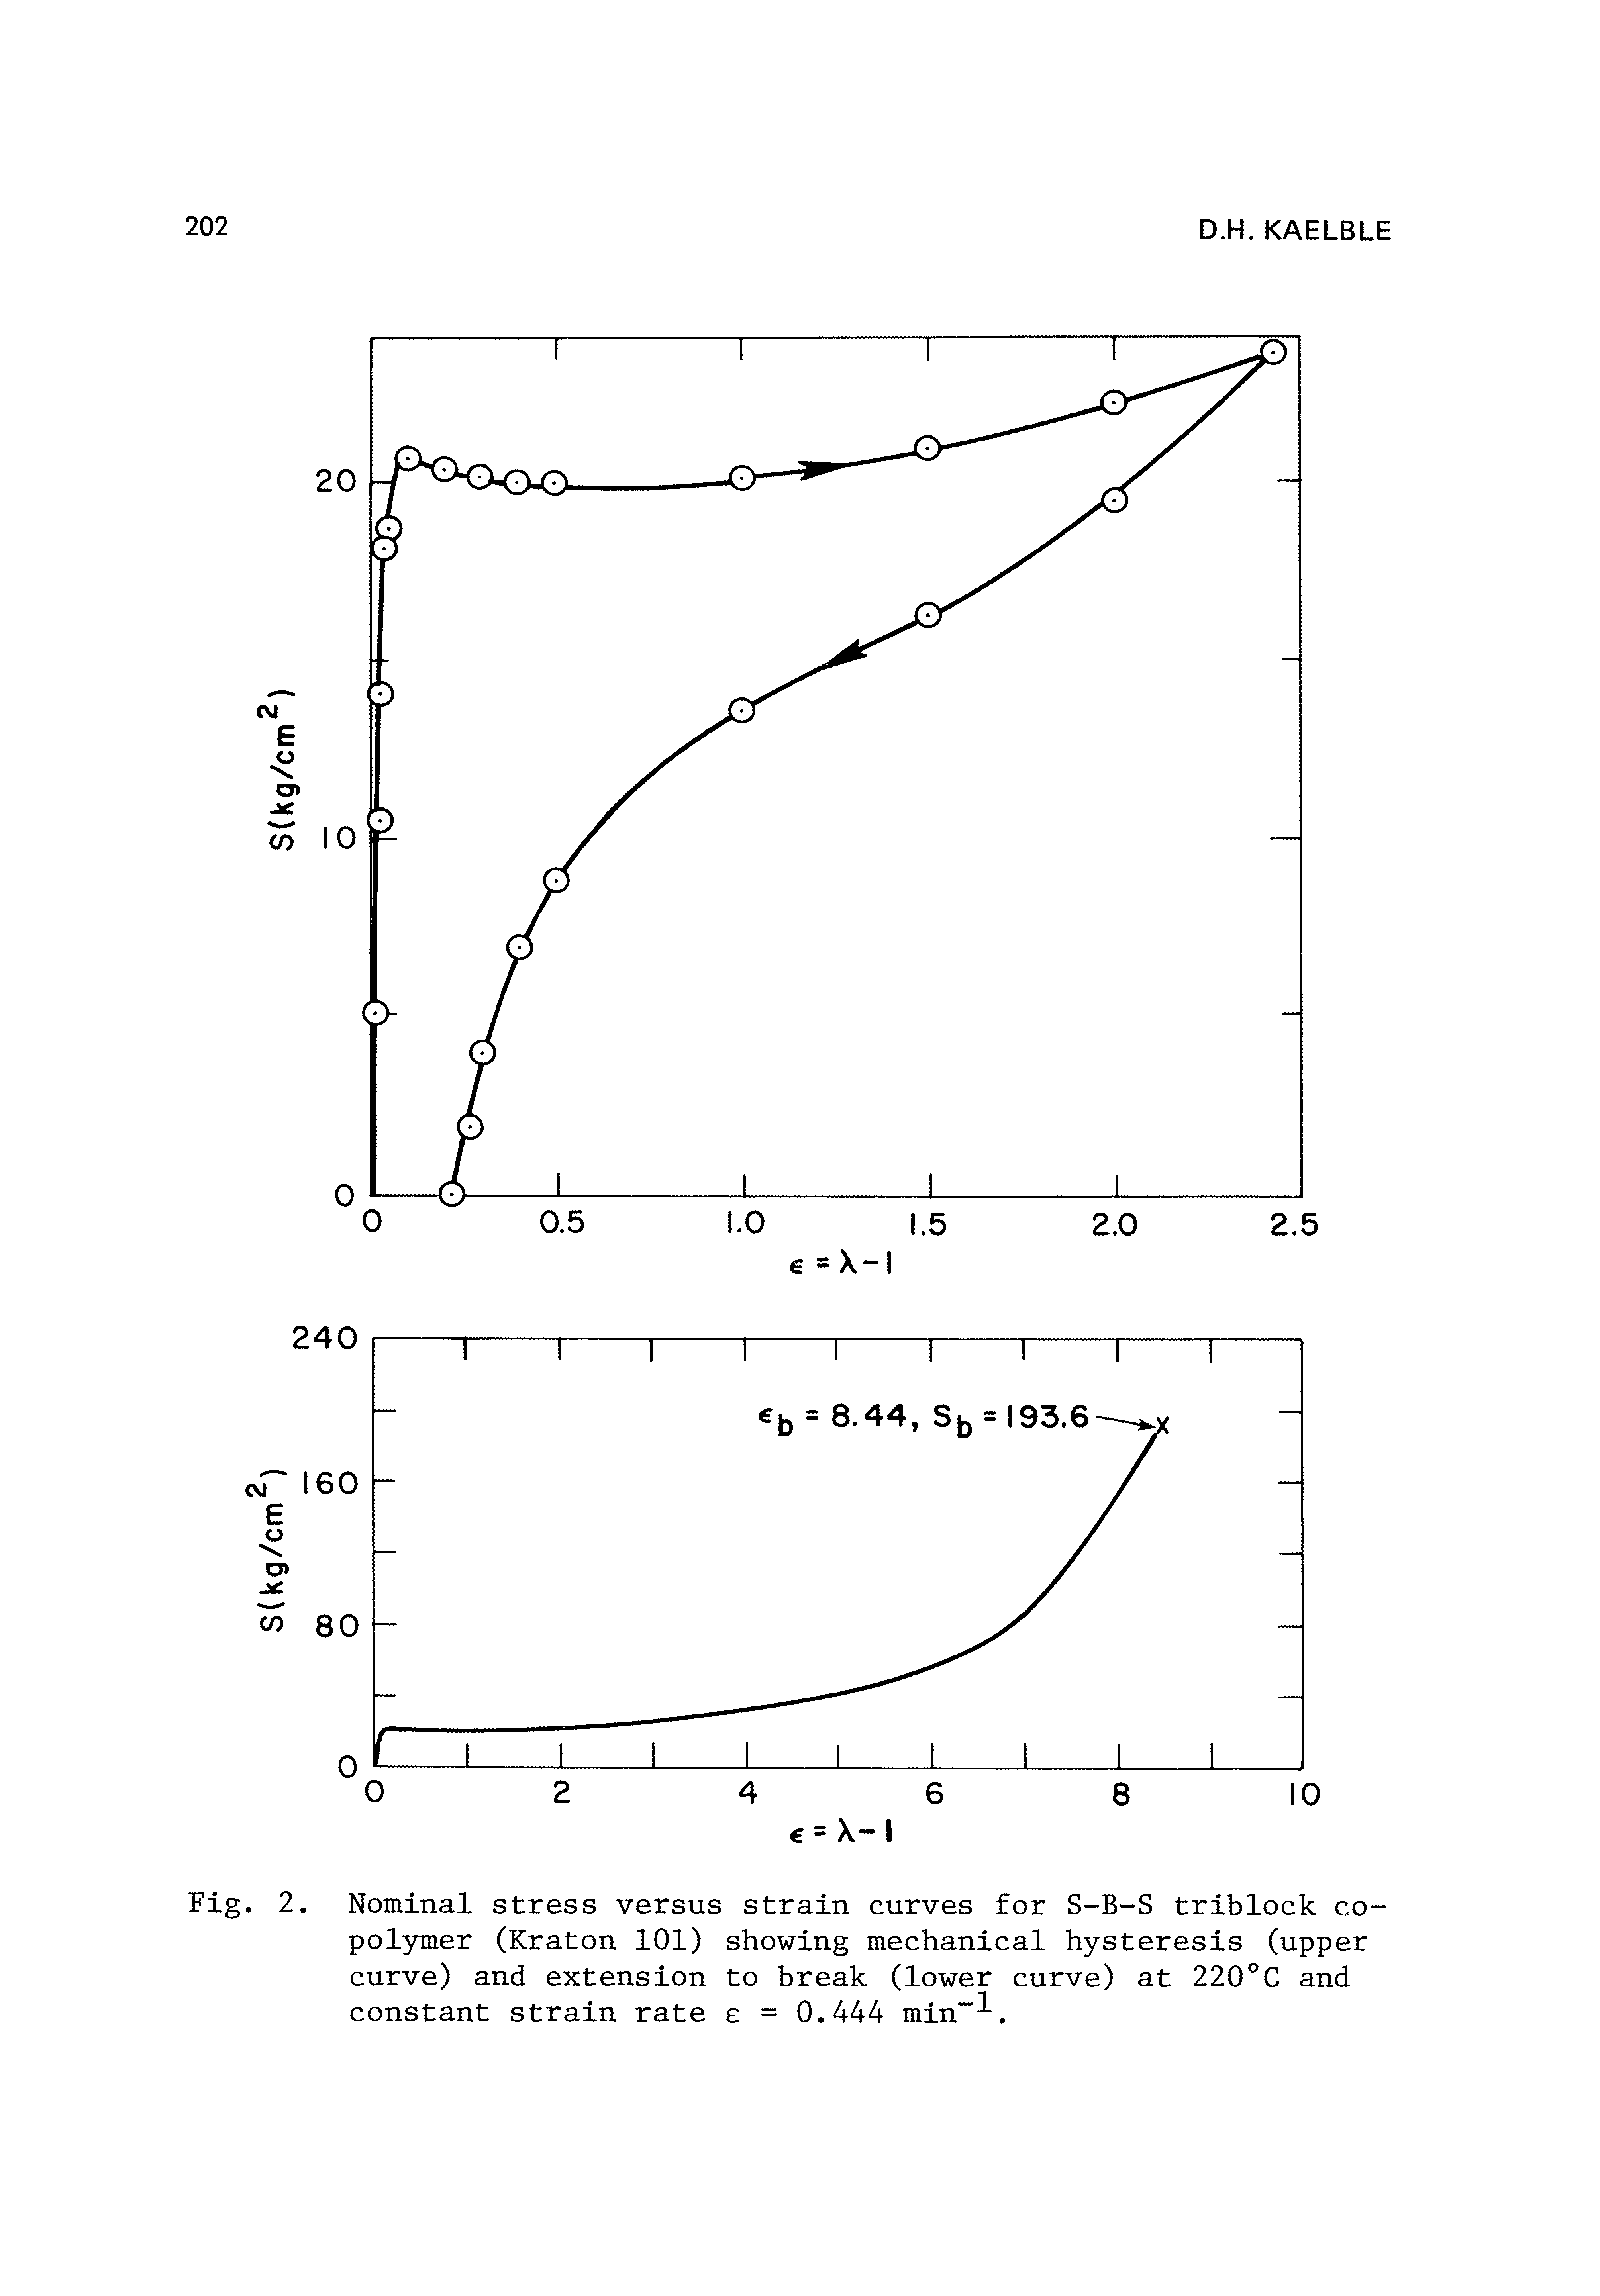 Fig. 2. Nominal stress versus strain curves for S-B-S triblock copolymer (Kraton 101) showing mechanical hysteresis (upper curve) and extension to break (lower curve) at 220°C and constant strain rate e = 0.444 min . ...